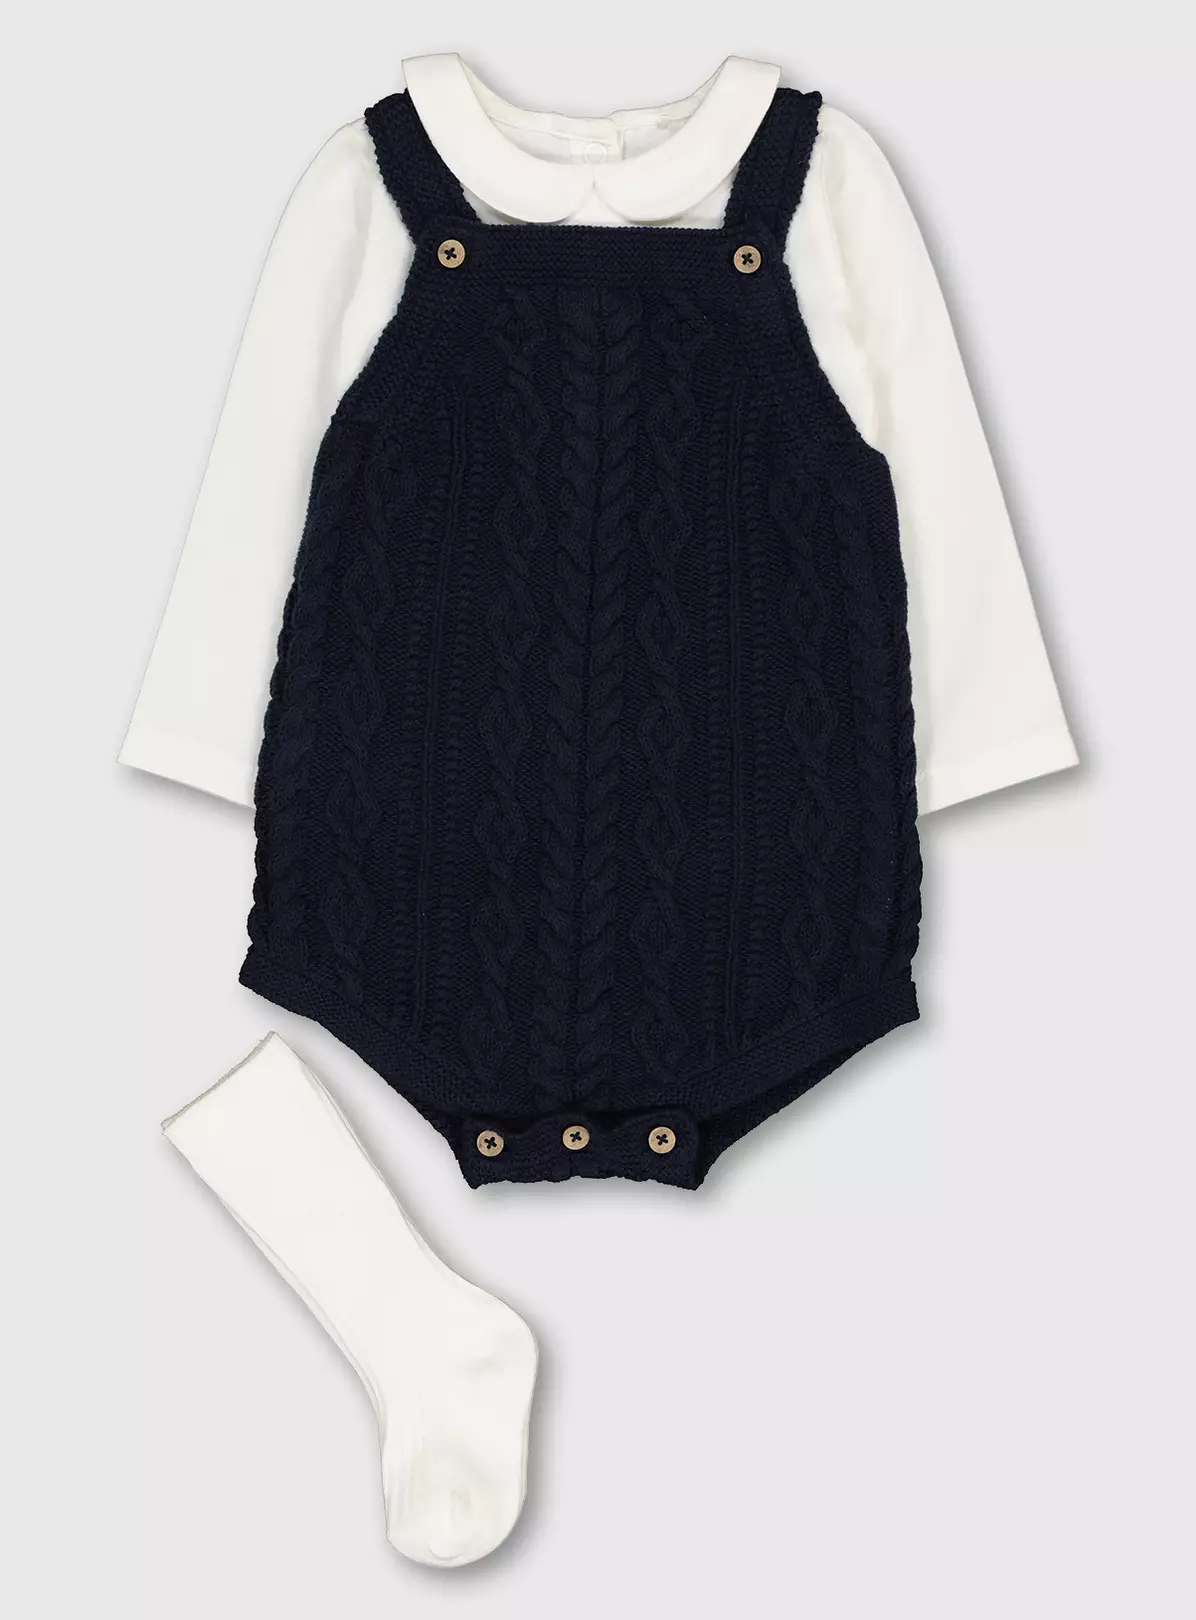 Navy Cable Knit Bodysuit & White Bodysuit 2 Pack – 3-6 month